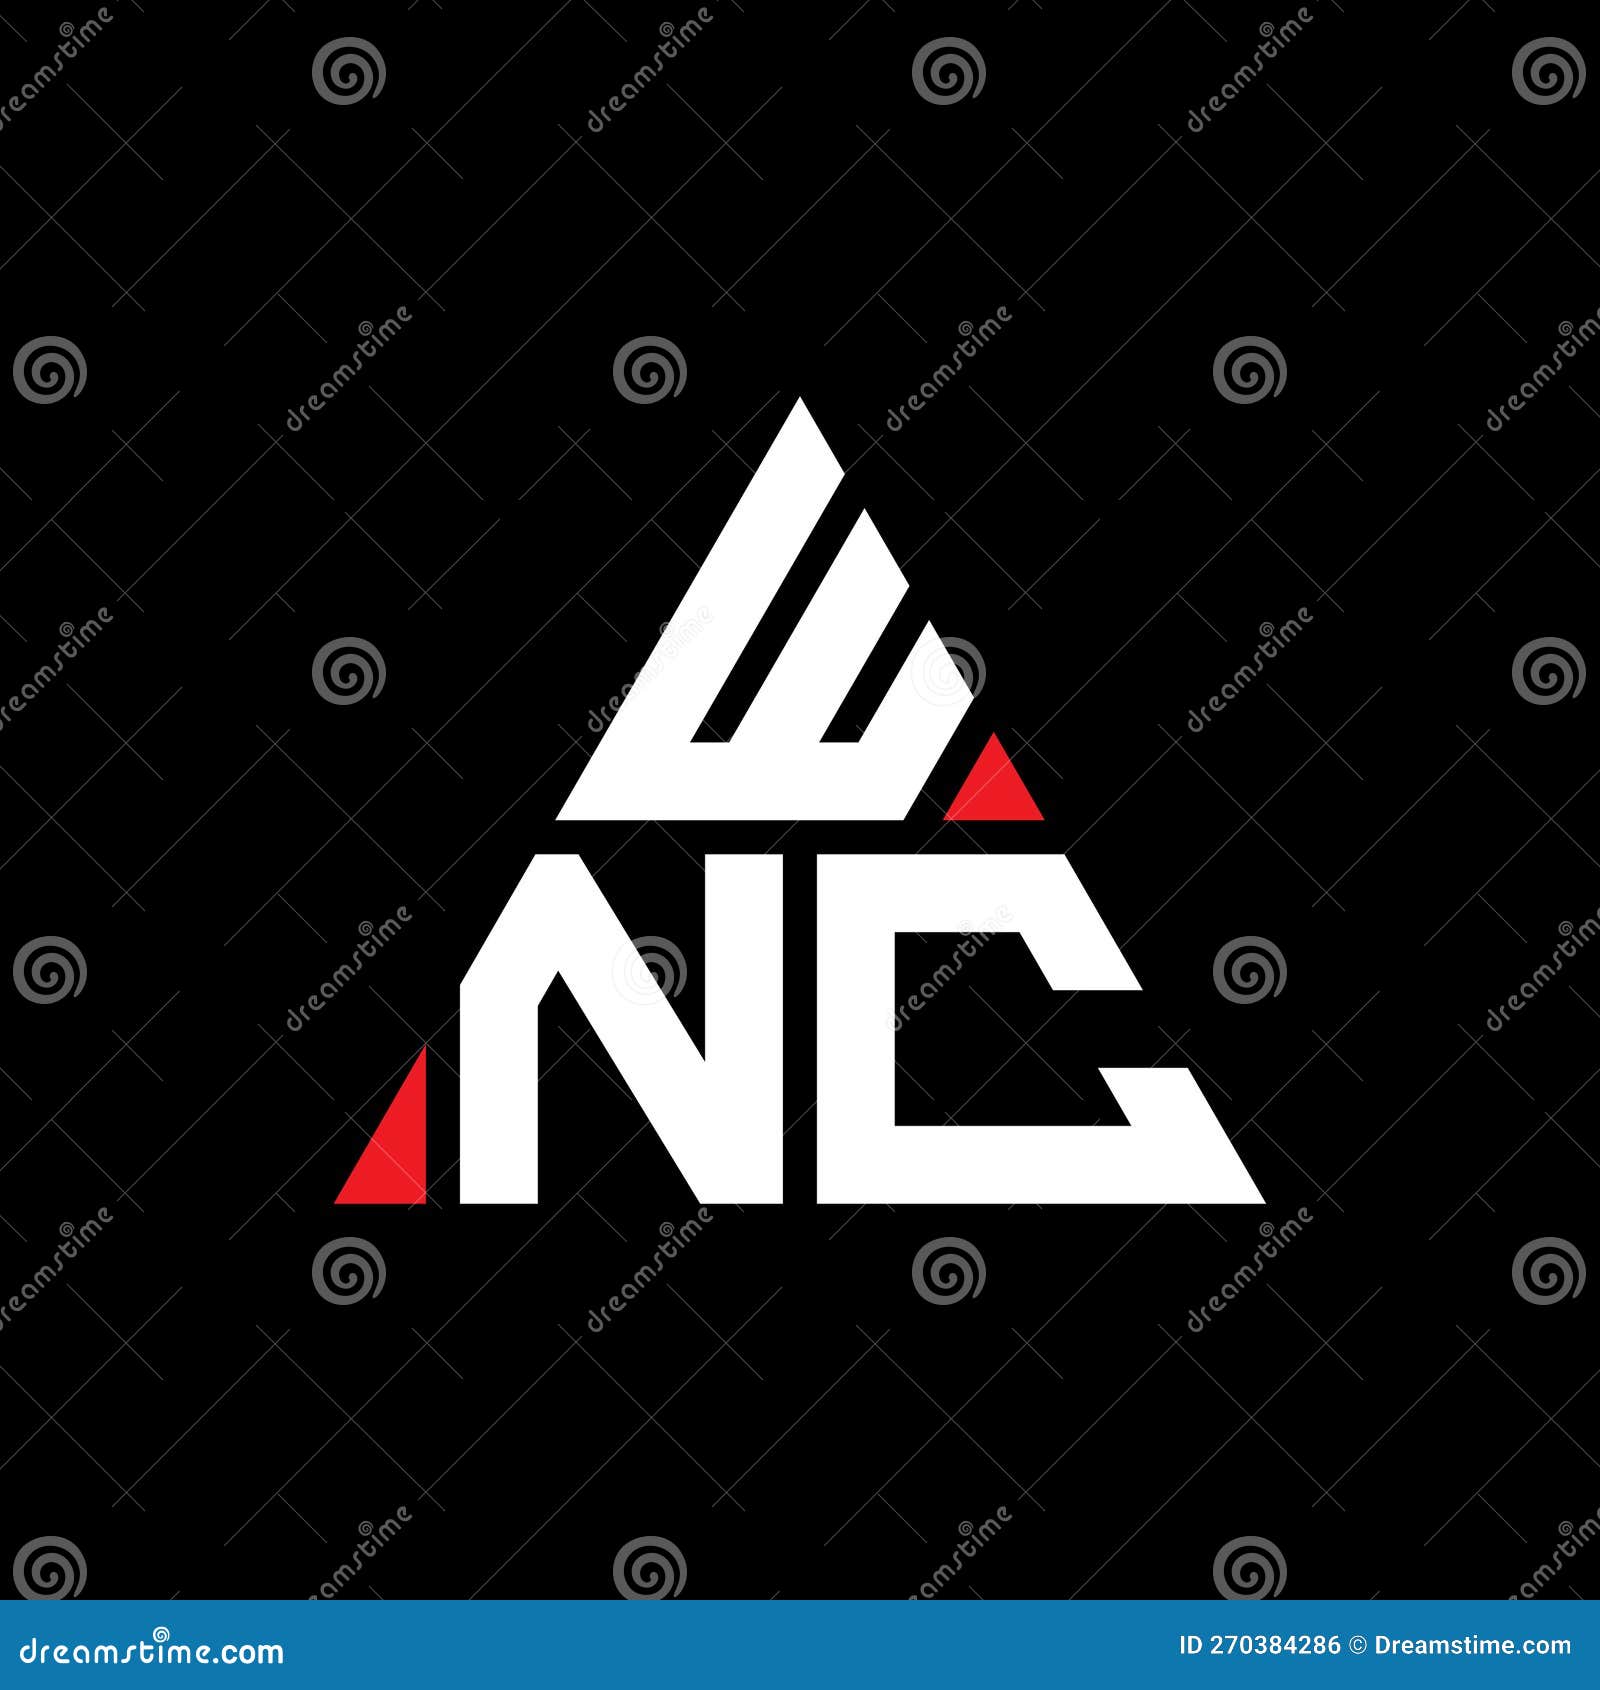 wnc triangle letter logo  with triangle . wnc triangle logo  monogram. wnc triangle  logo template with red